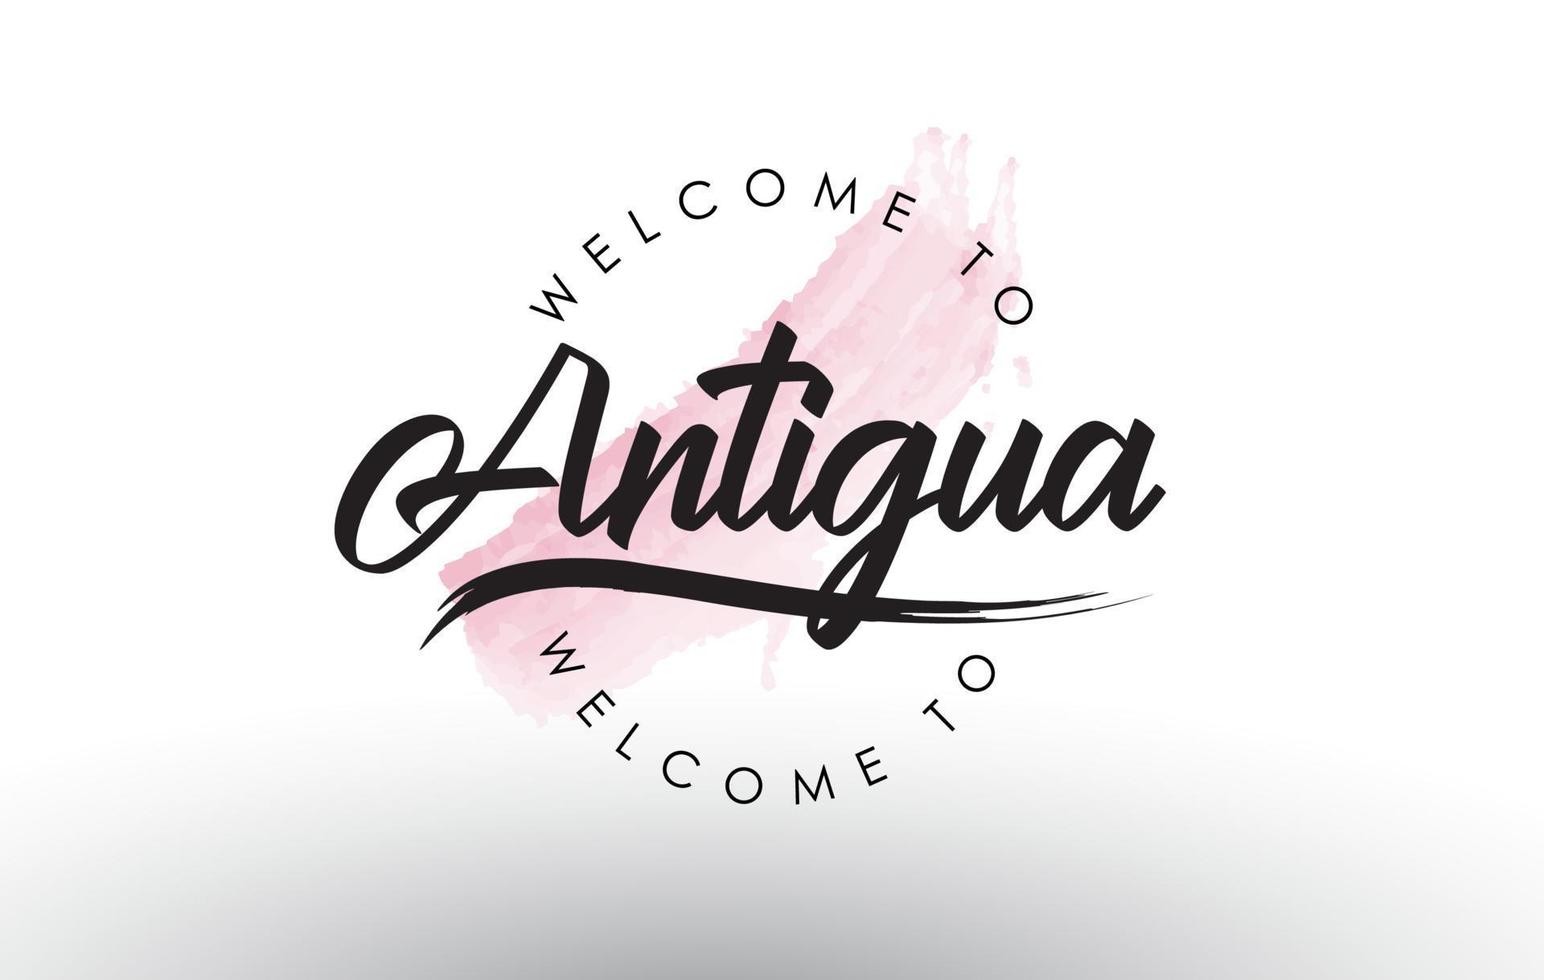 Antigua Welcome to Text with Watercolor Pink Brush Stroke vector